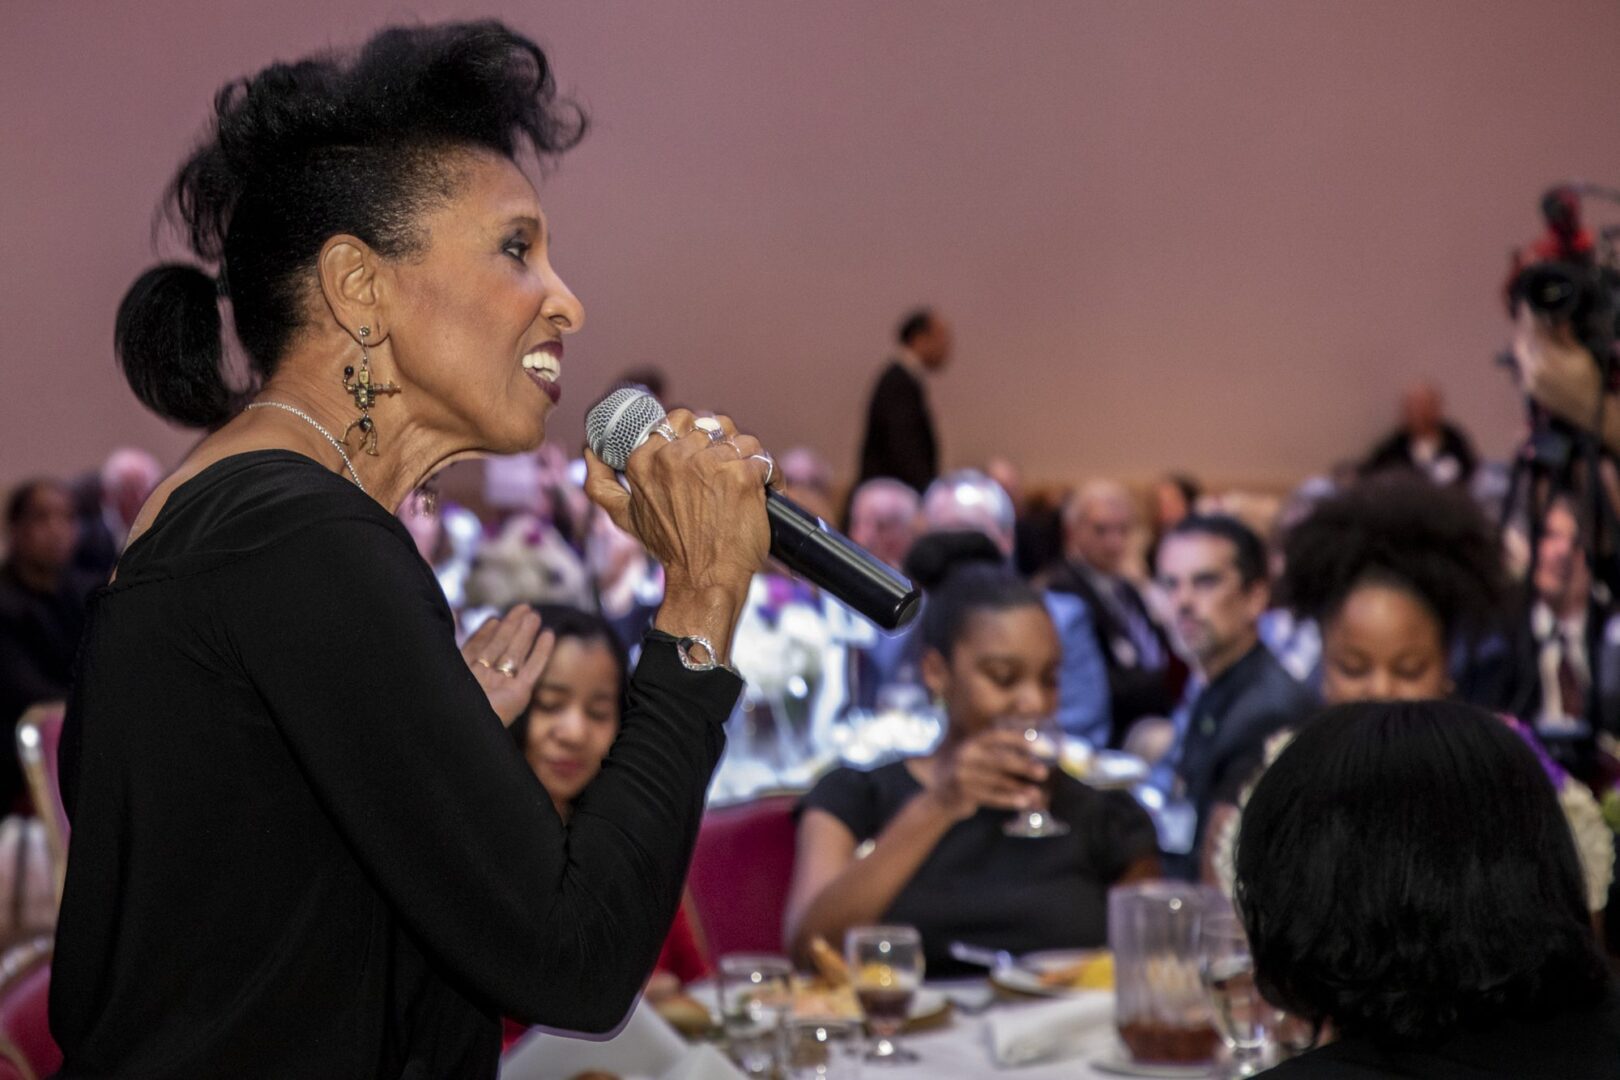 A woman is speaking into a microphone at a banquet.